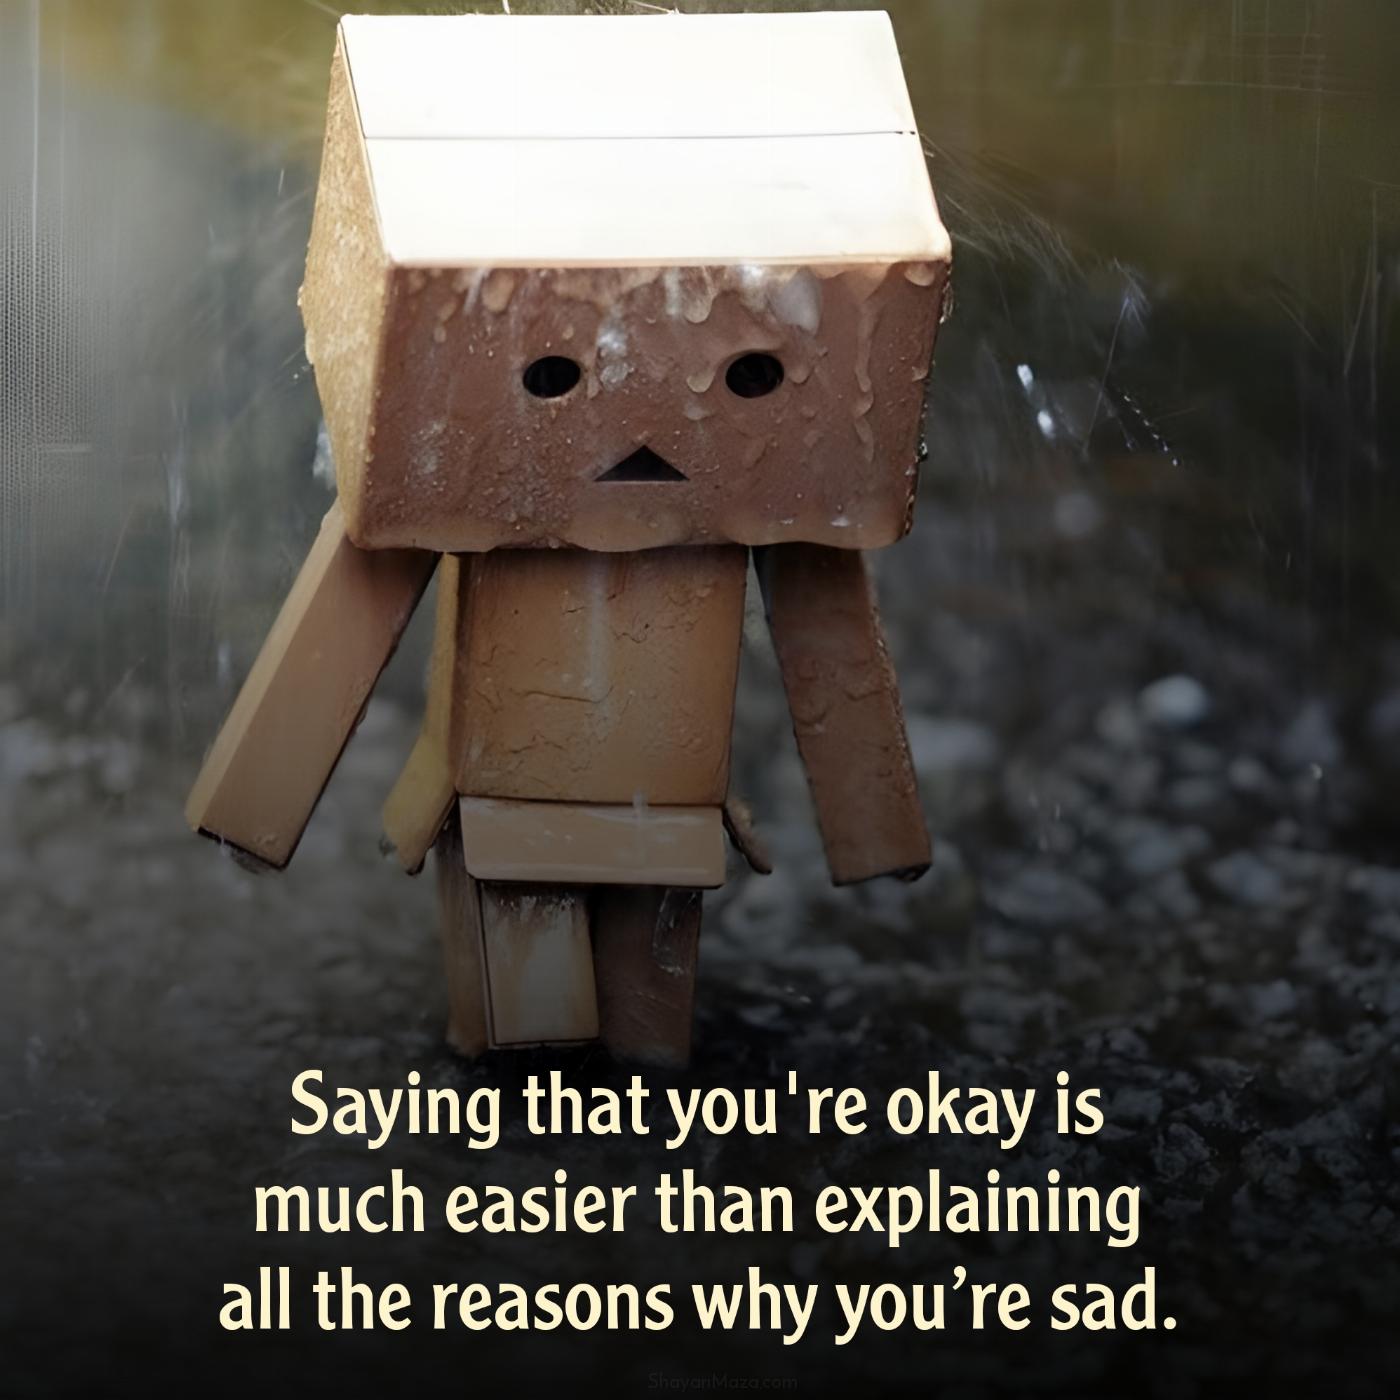 Saying that you're okay is much easier than explaining